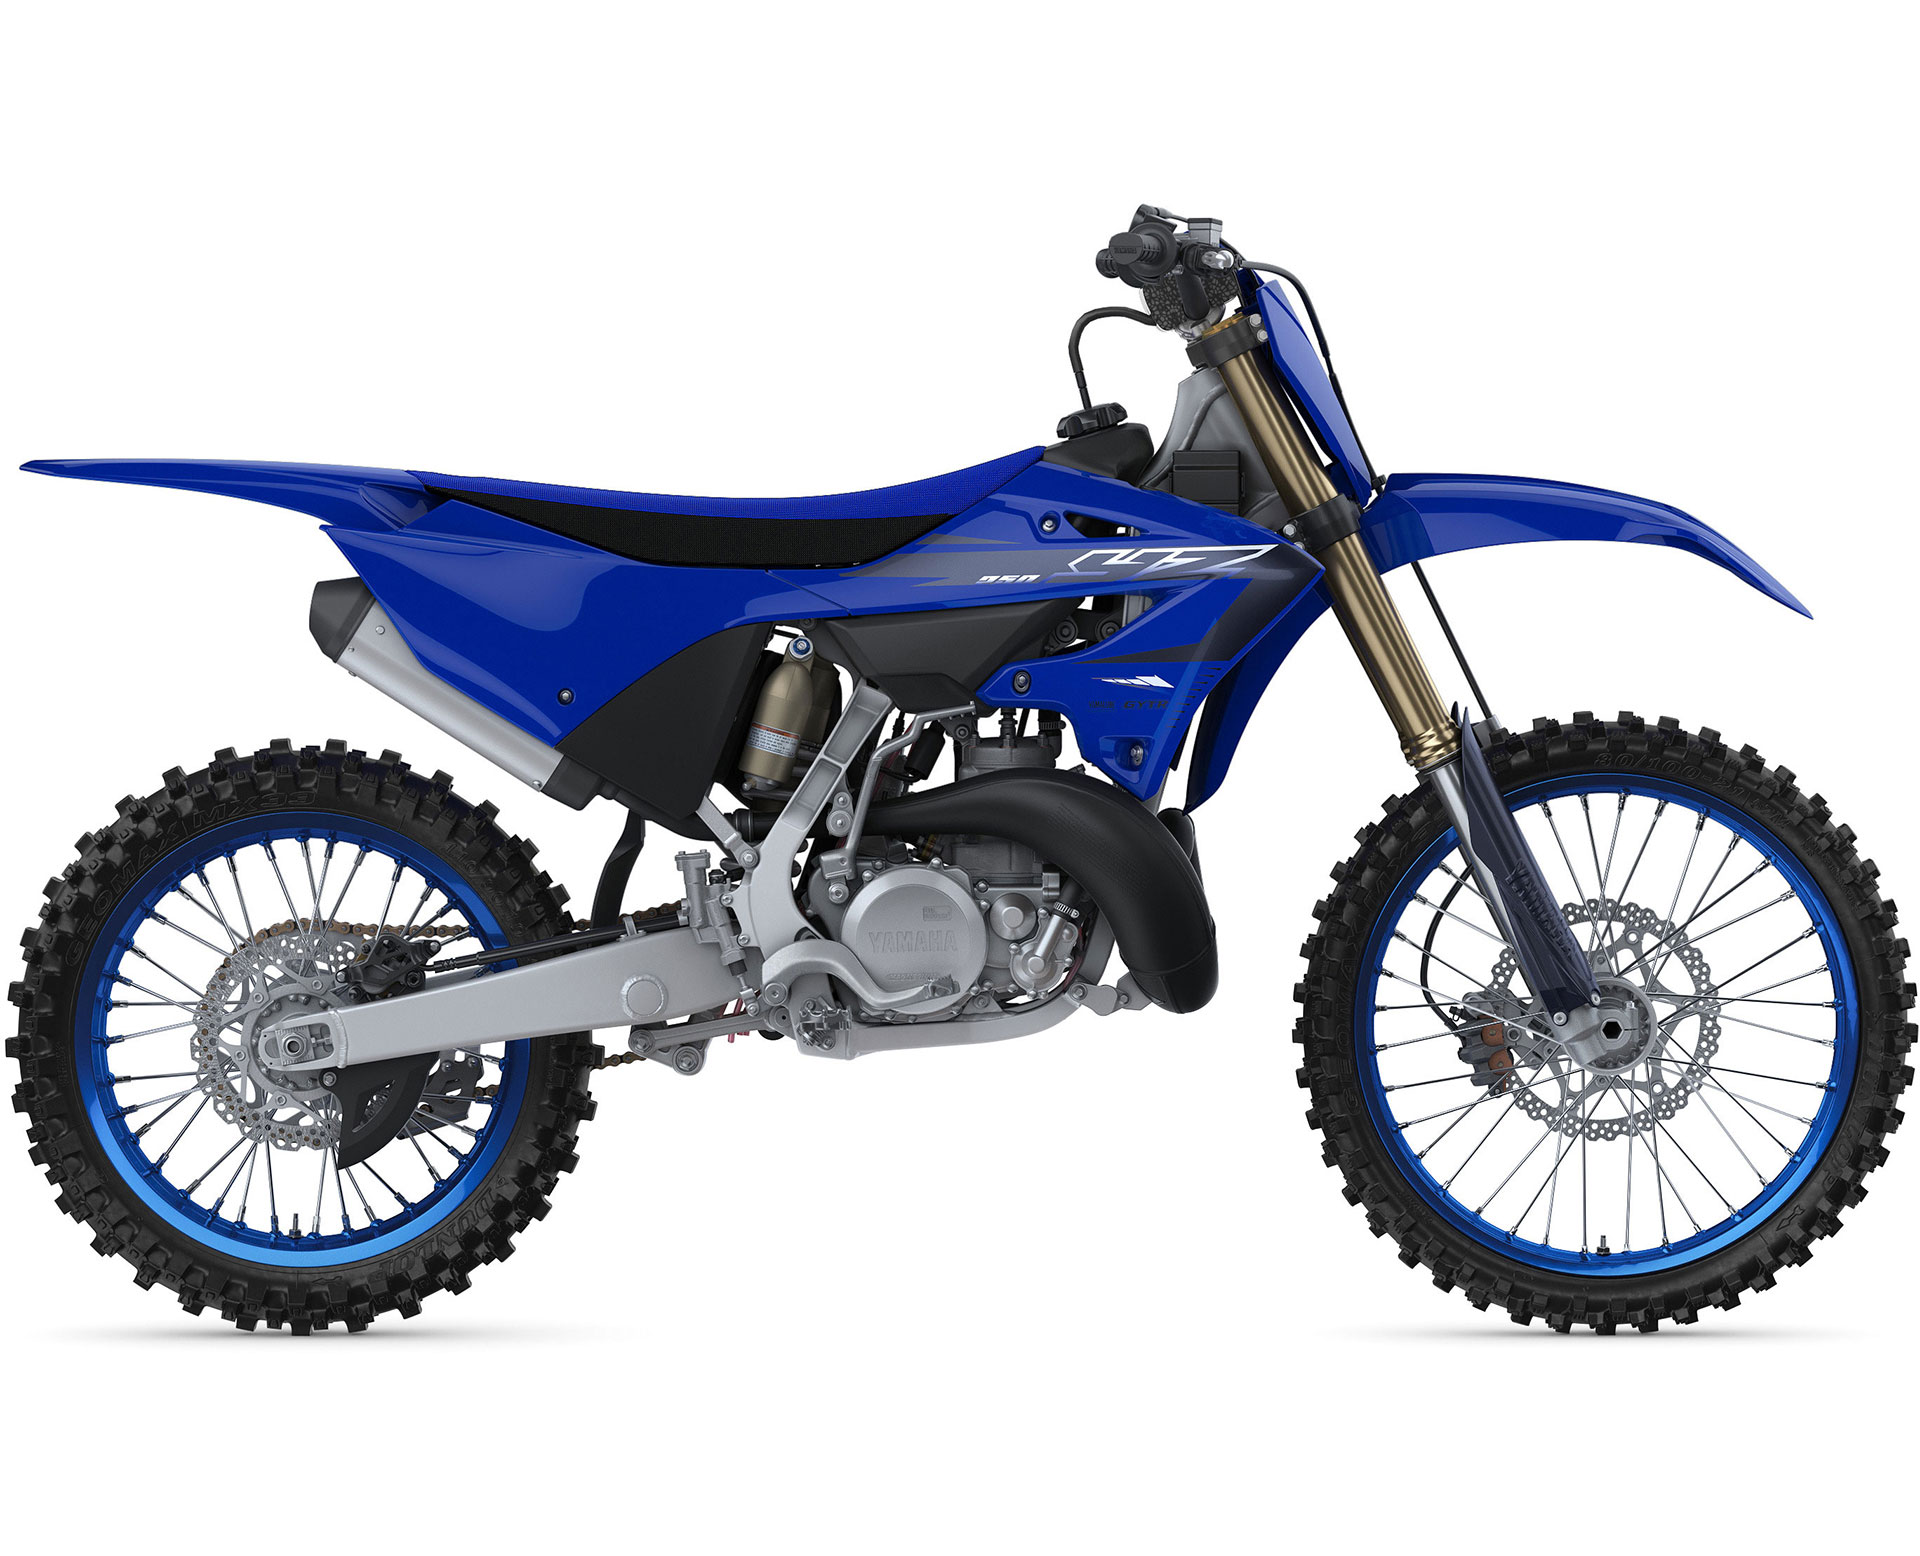 Thumbnail of your customized YZ250 2023